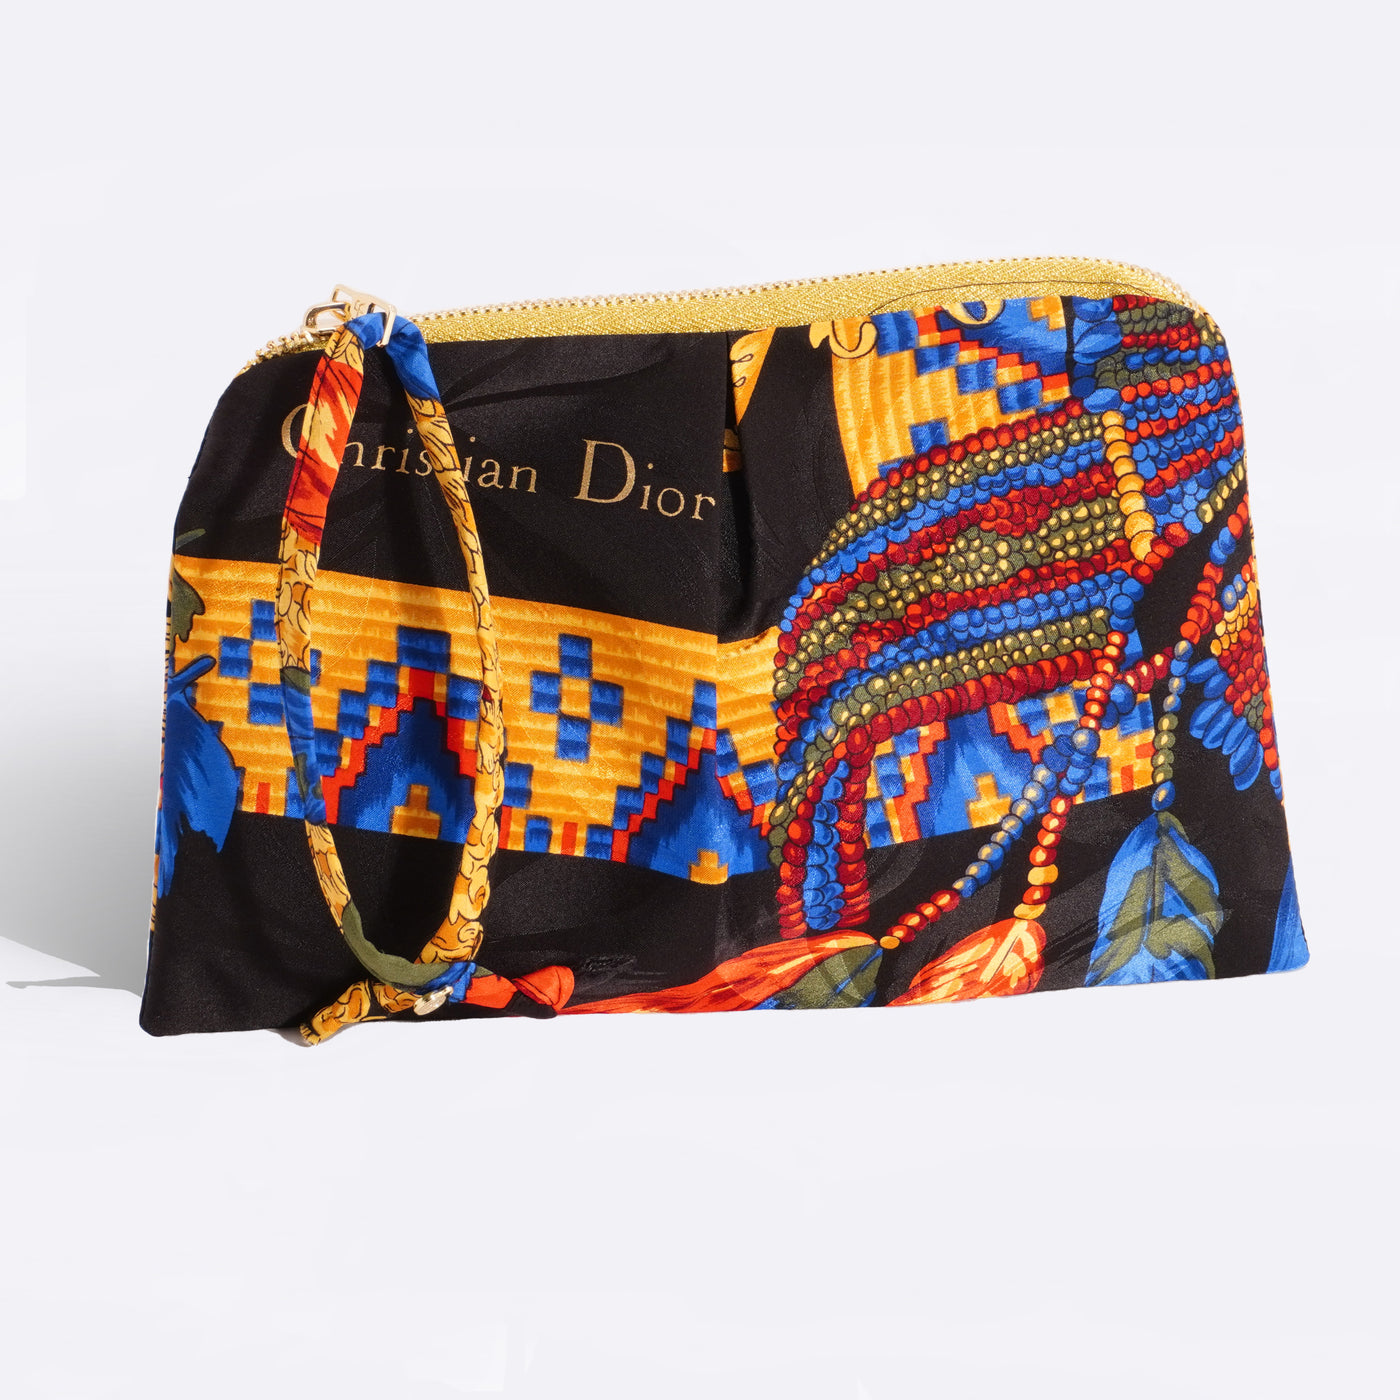 "Comanche" Scarf Bag (Upcycled from Christian Dior Scarf) Party Clutch Hampton Road Designs   